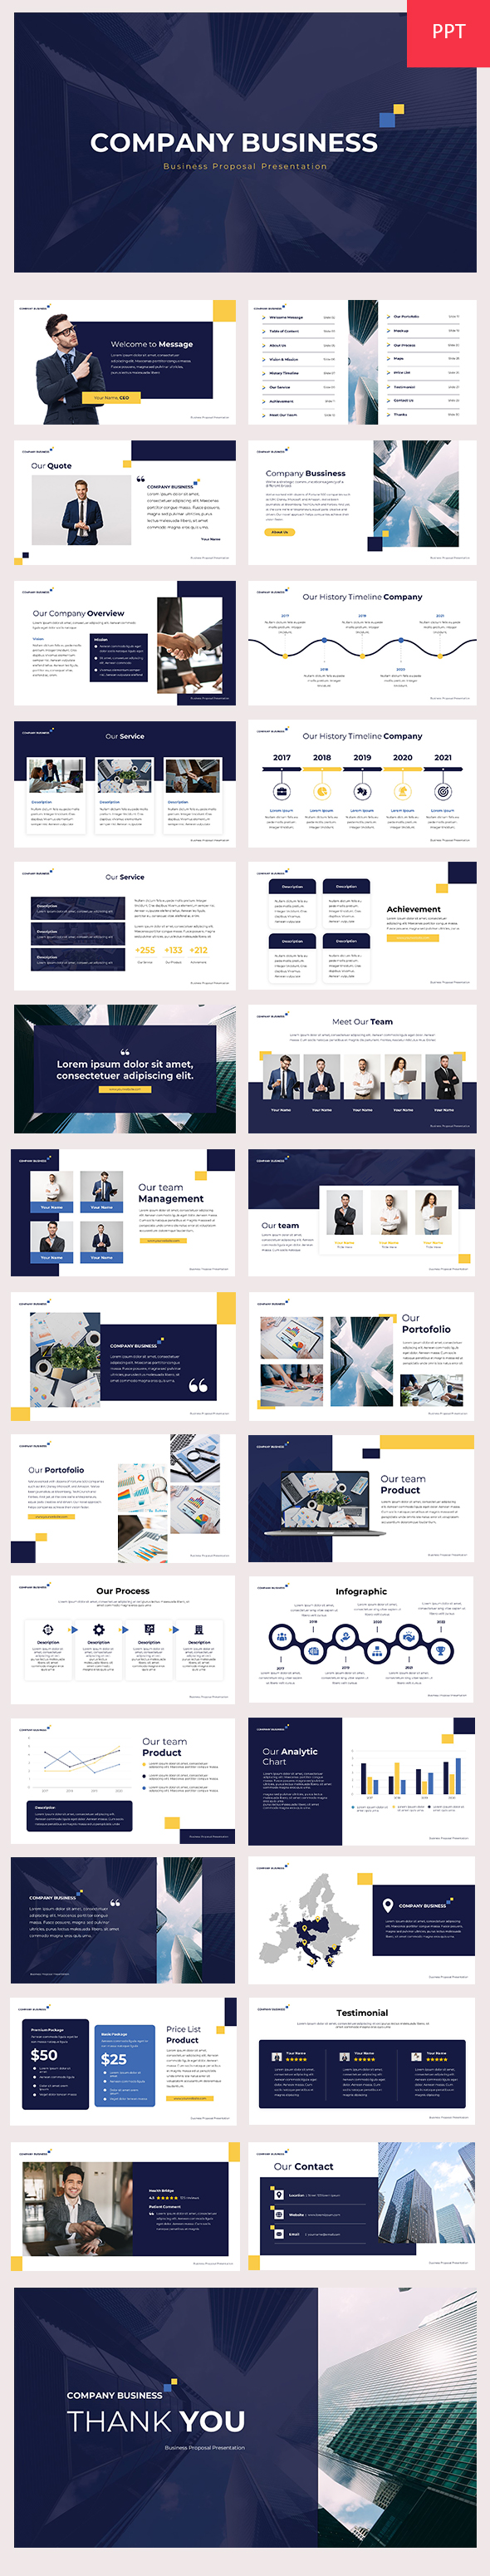 Company Business - PPT Template